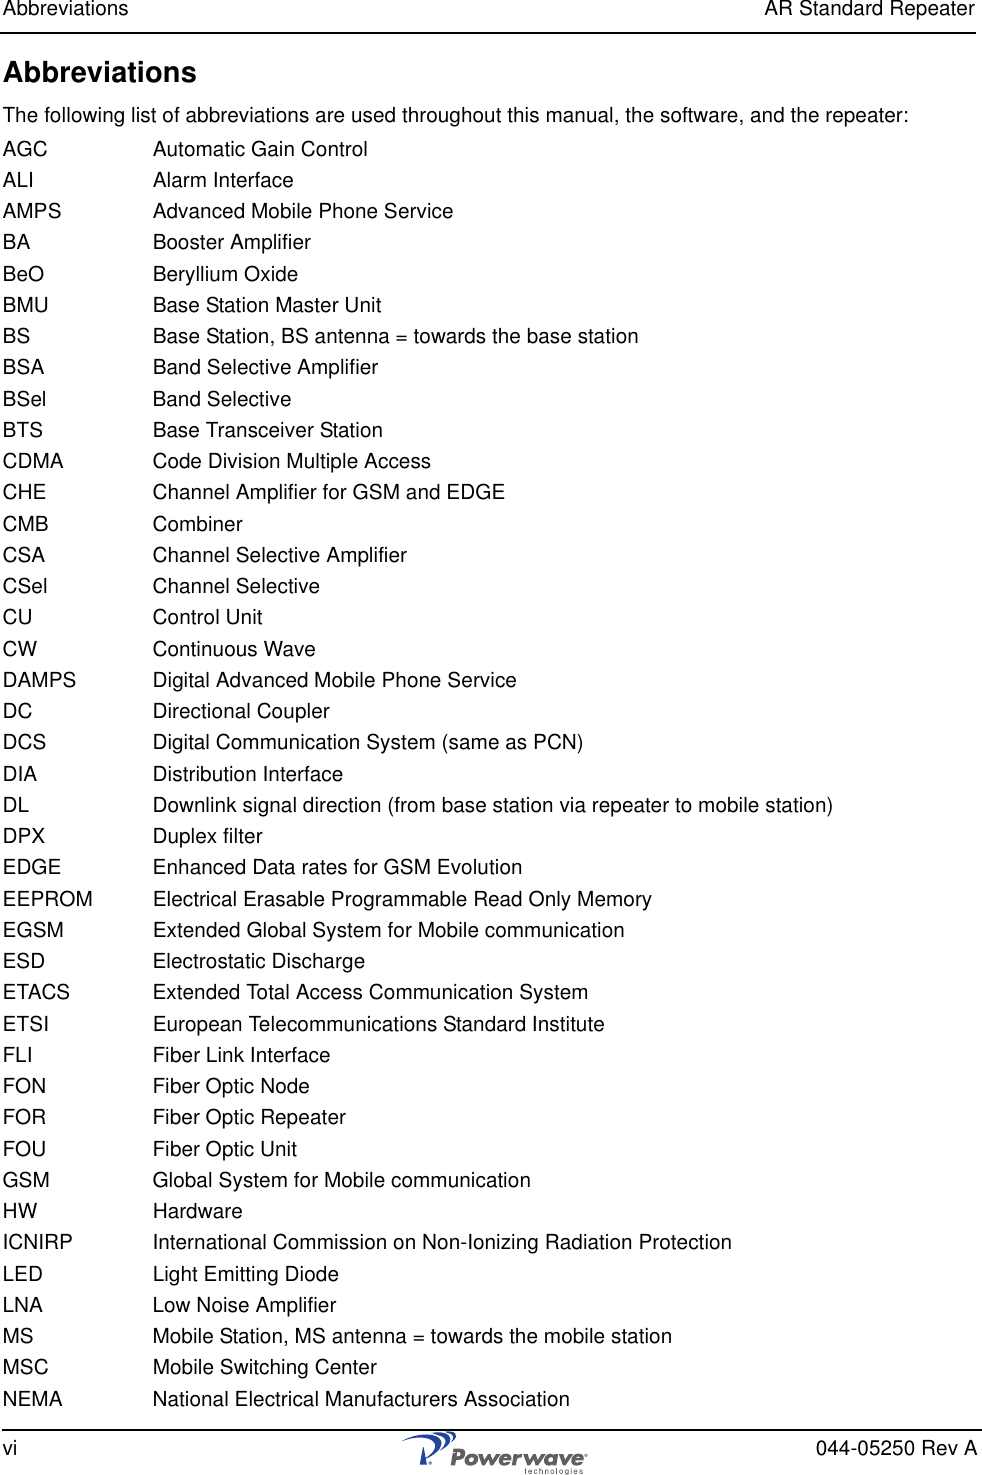 Abbreviations AR Standard Repeatervi 044-05250 Rev AAbbreviationsThe following list of abbreviations are used throughout this manual, the software, and the repeater:AGC Automatic Gain ControlALI Alarm InterfaceAMPS Advanced Mobile Phone ServiceBA Booster AmplifierBeO Beryllium OxideBMU Base Station Master UnitBS Base Station, BS antenna = towards the base stationBSA Band Selective AmplifierBSel Band SelectiveBTS Base Transceiver StationCDMA Code Division Multiple AccessCHE Channel Amplifier for GSM and EDGECMB CombinerCSA Channel Selective AmplifierCSel Channel SelectiveCU Control UnitCW Continuous WaveDAMPS Digital Advanced Mobile Phone ServiceDC Directional CouplerDCS Digital Communication System (same as PCN)DIA Distribution InterfaceDL Downlink signal direction (from base station via repeater to mobile station)DPX Duplex filterEDGE Enhanced Data rates for GSM EvolutionEEPROM Electrical Erasable Programmable Read Only MemoryEGSM Extended Global System for Mobile communicationESD Electrostatic DischargeETACS Extended Total Access Communication SystemETSI European Telecommunications Standard InstituteFLI Fiber Link InterfaceFON Fiber Optic NodeFOR Fiber Optic RepeaterFOU Fiber Optic UnitGSM Global System for Mobile communicationHW HardwareICNIRP International Commission on Non-Ionizing Radiation ProtectionLED Light Emitting DiodeLNA Low Noise AmplifierMS Mobile Station, MS antenna = towards the mobile stationMSC Mobile Switching CenterNEMA National Electrical Manufacturers Association